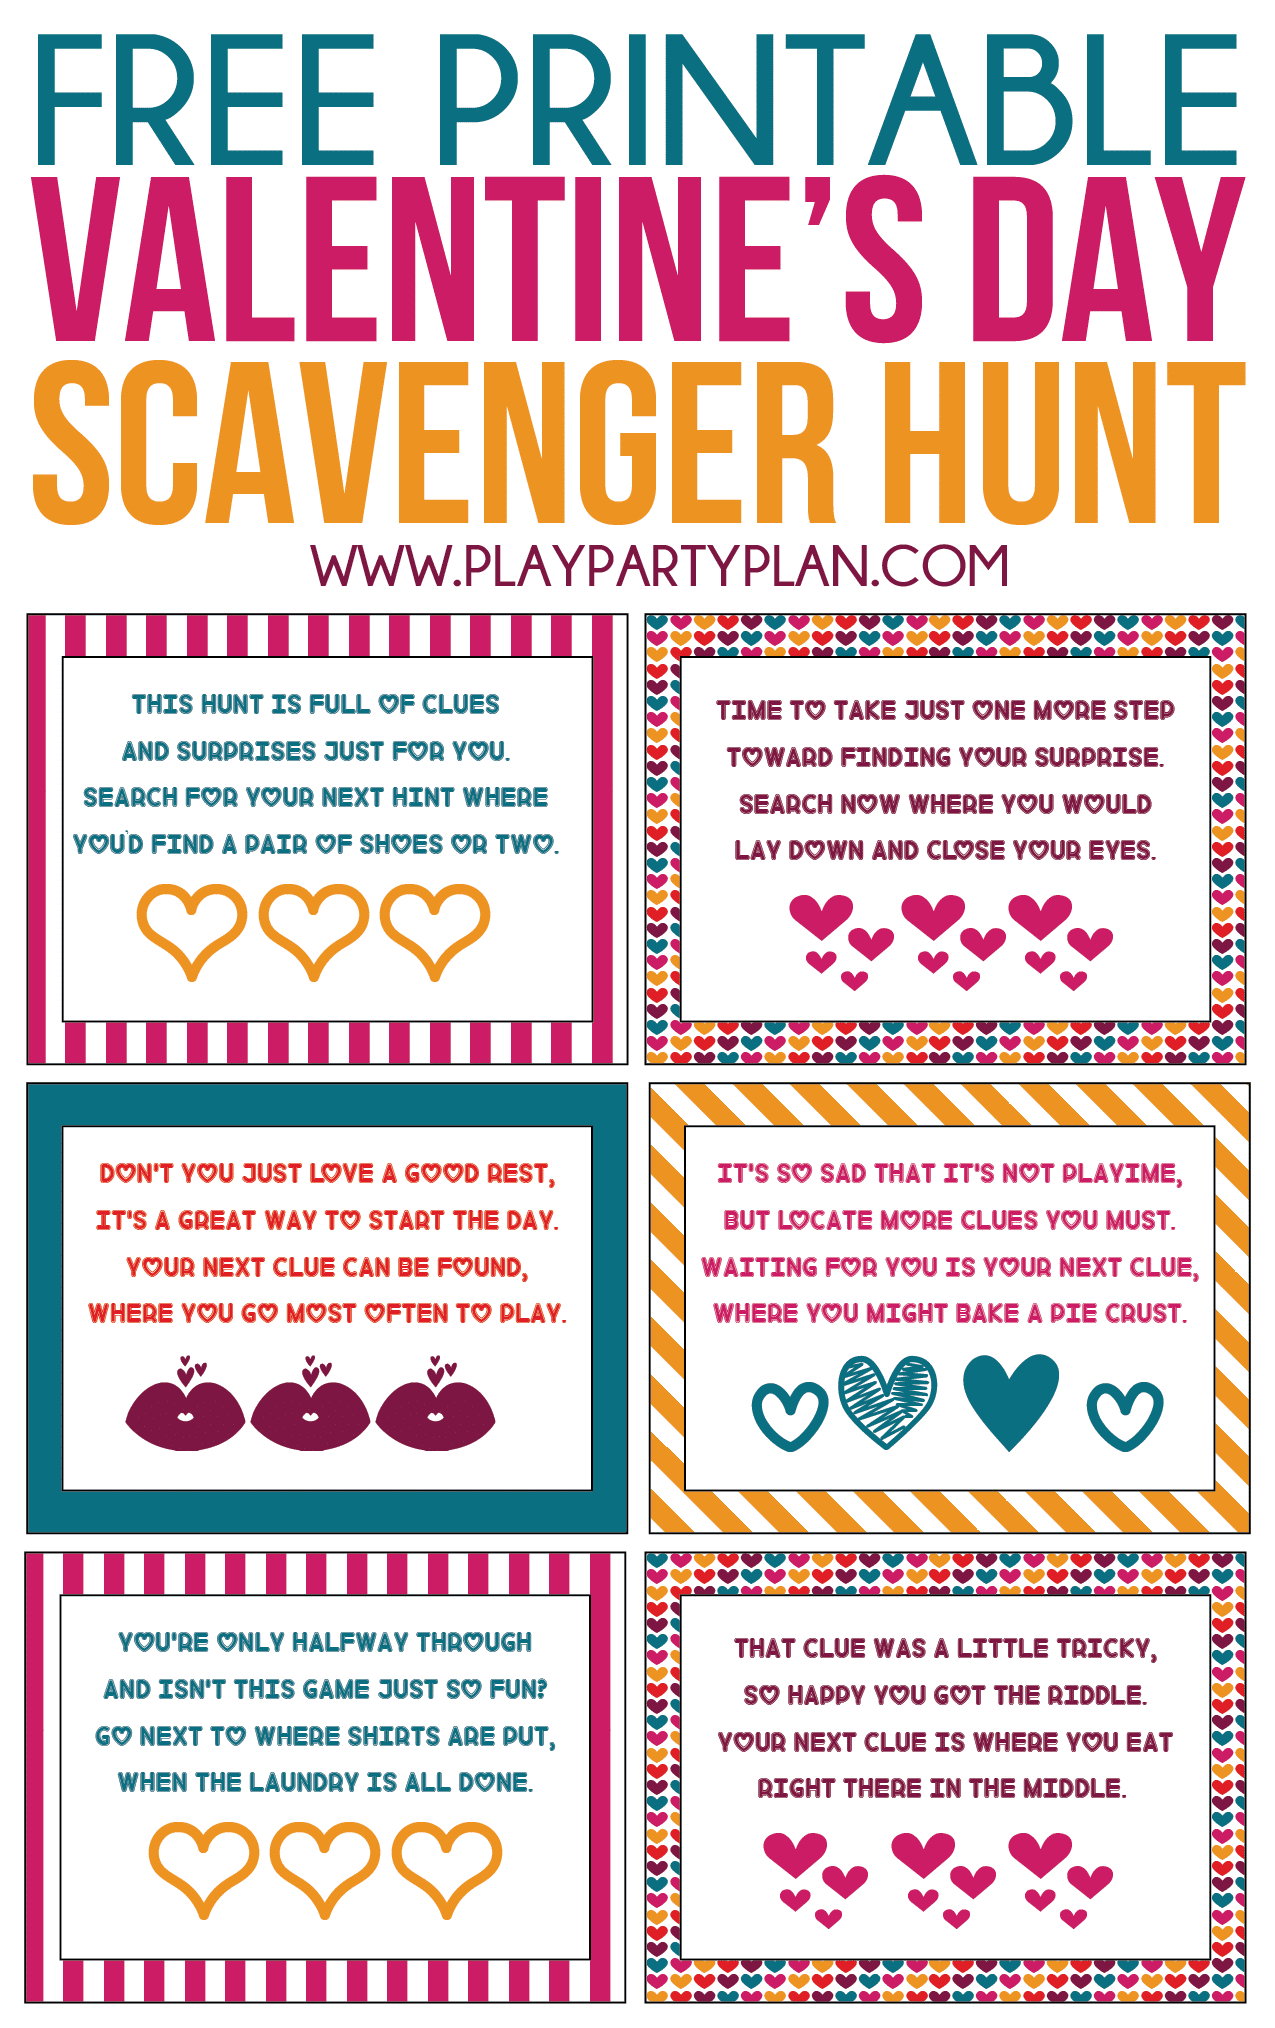 free-printable-valentine-s-day-scavenger-hunt-kids-adults-with-regard